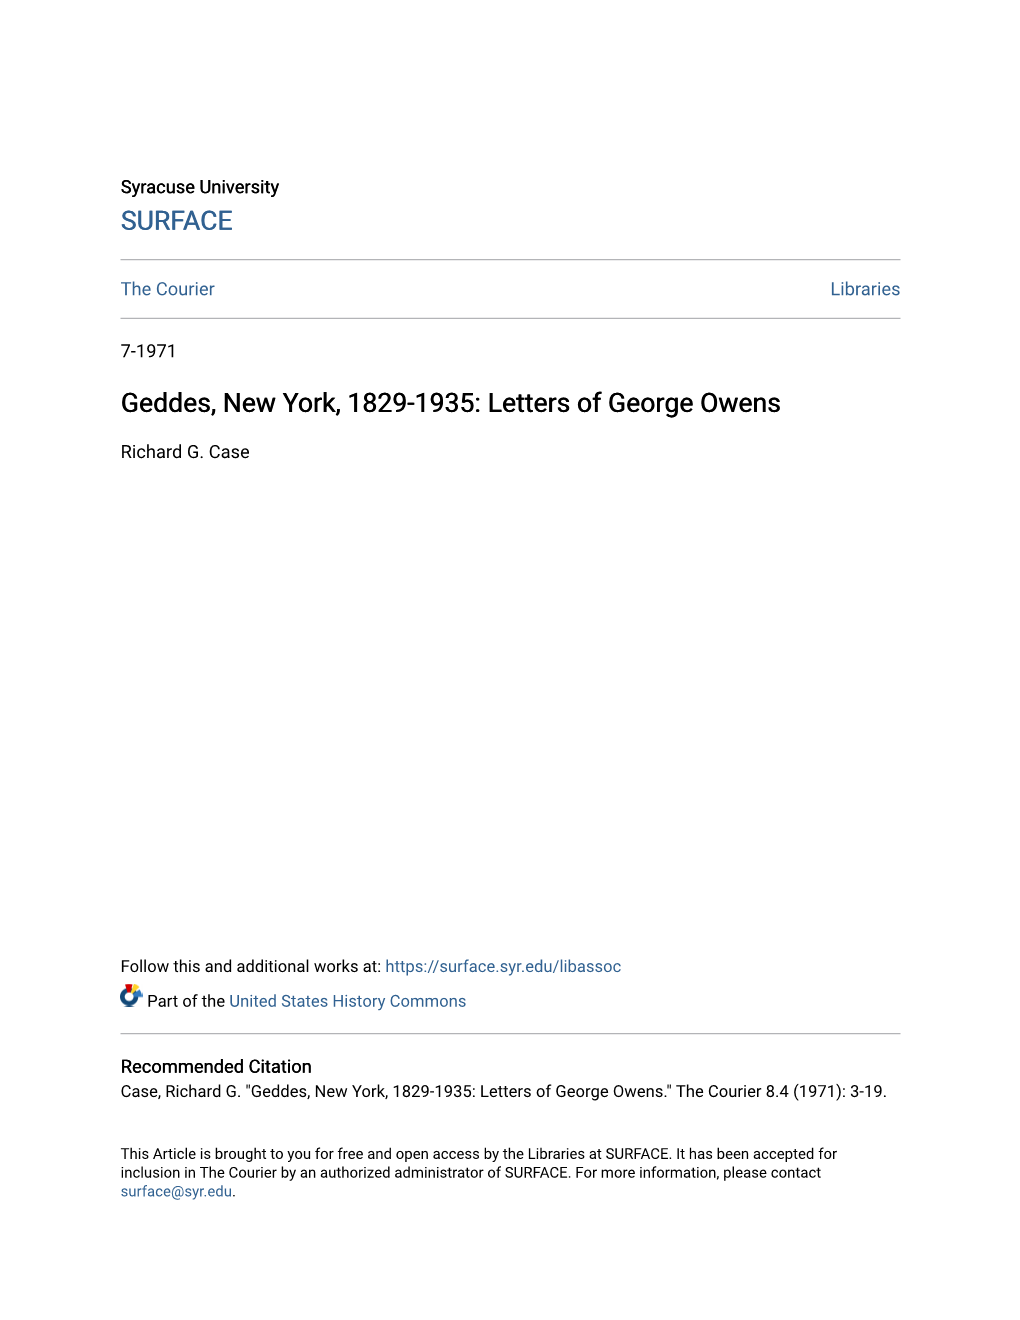 Letters of George Owens